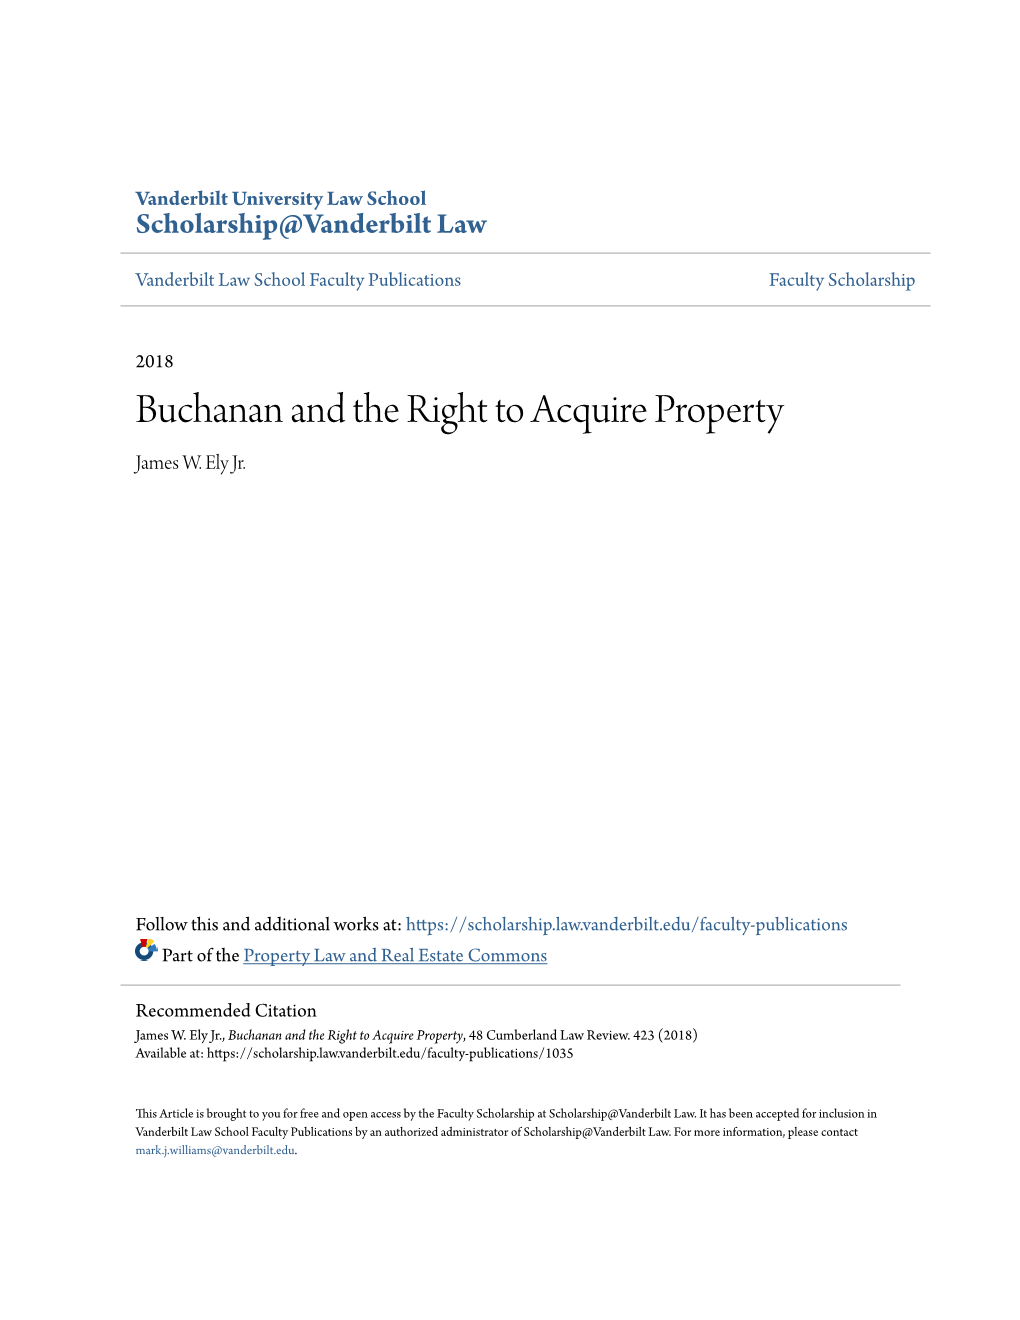 Buchanan and the Right to Acquire Property James W